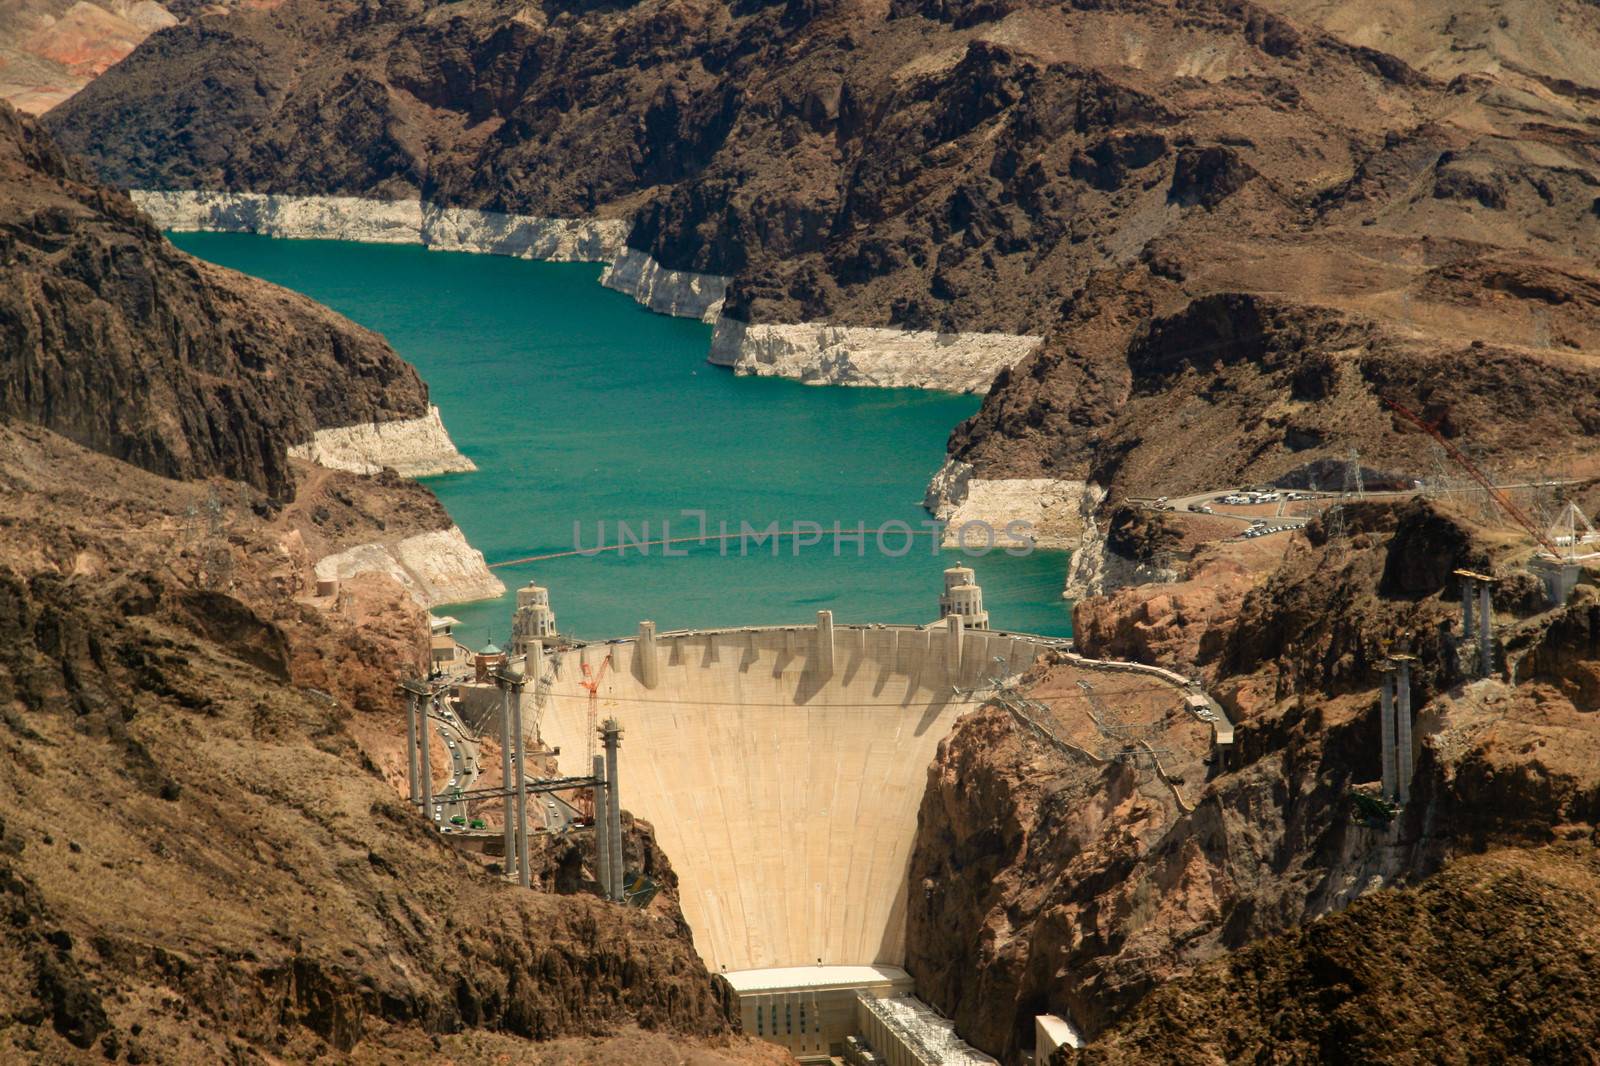 Hoover Dam in the Black Canyon of the Colorado River, on the border between Arizona and Nevada.